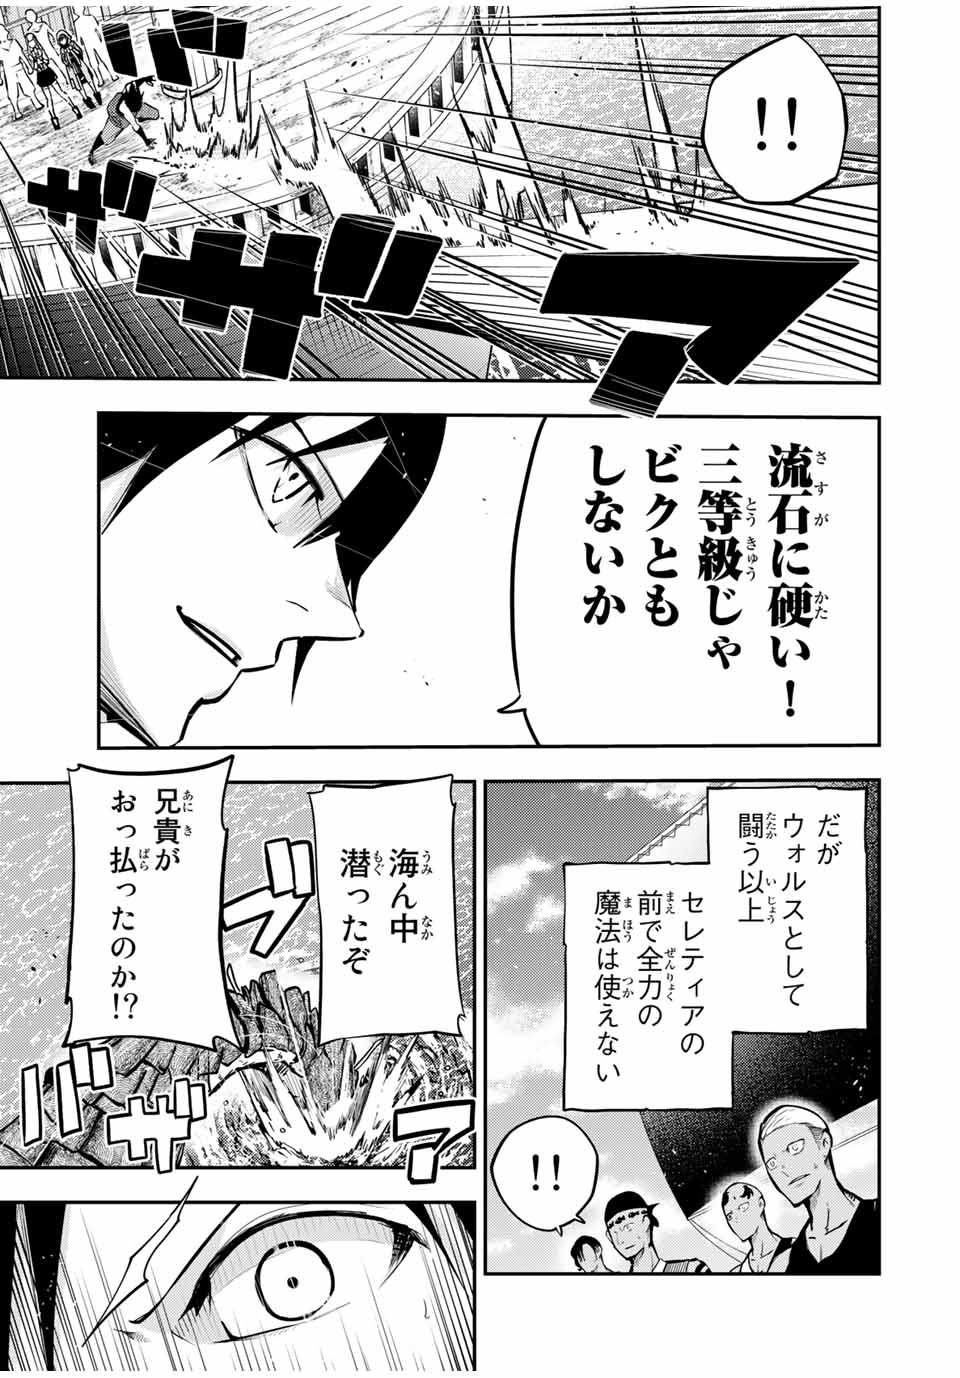 the strongest former prince-; 奴隷転生 ～その奴隷、最強の元王子につき～ 第40話 - Page 7